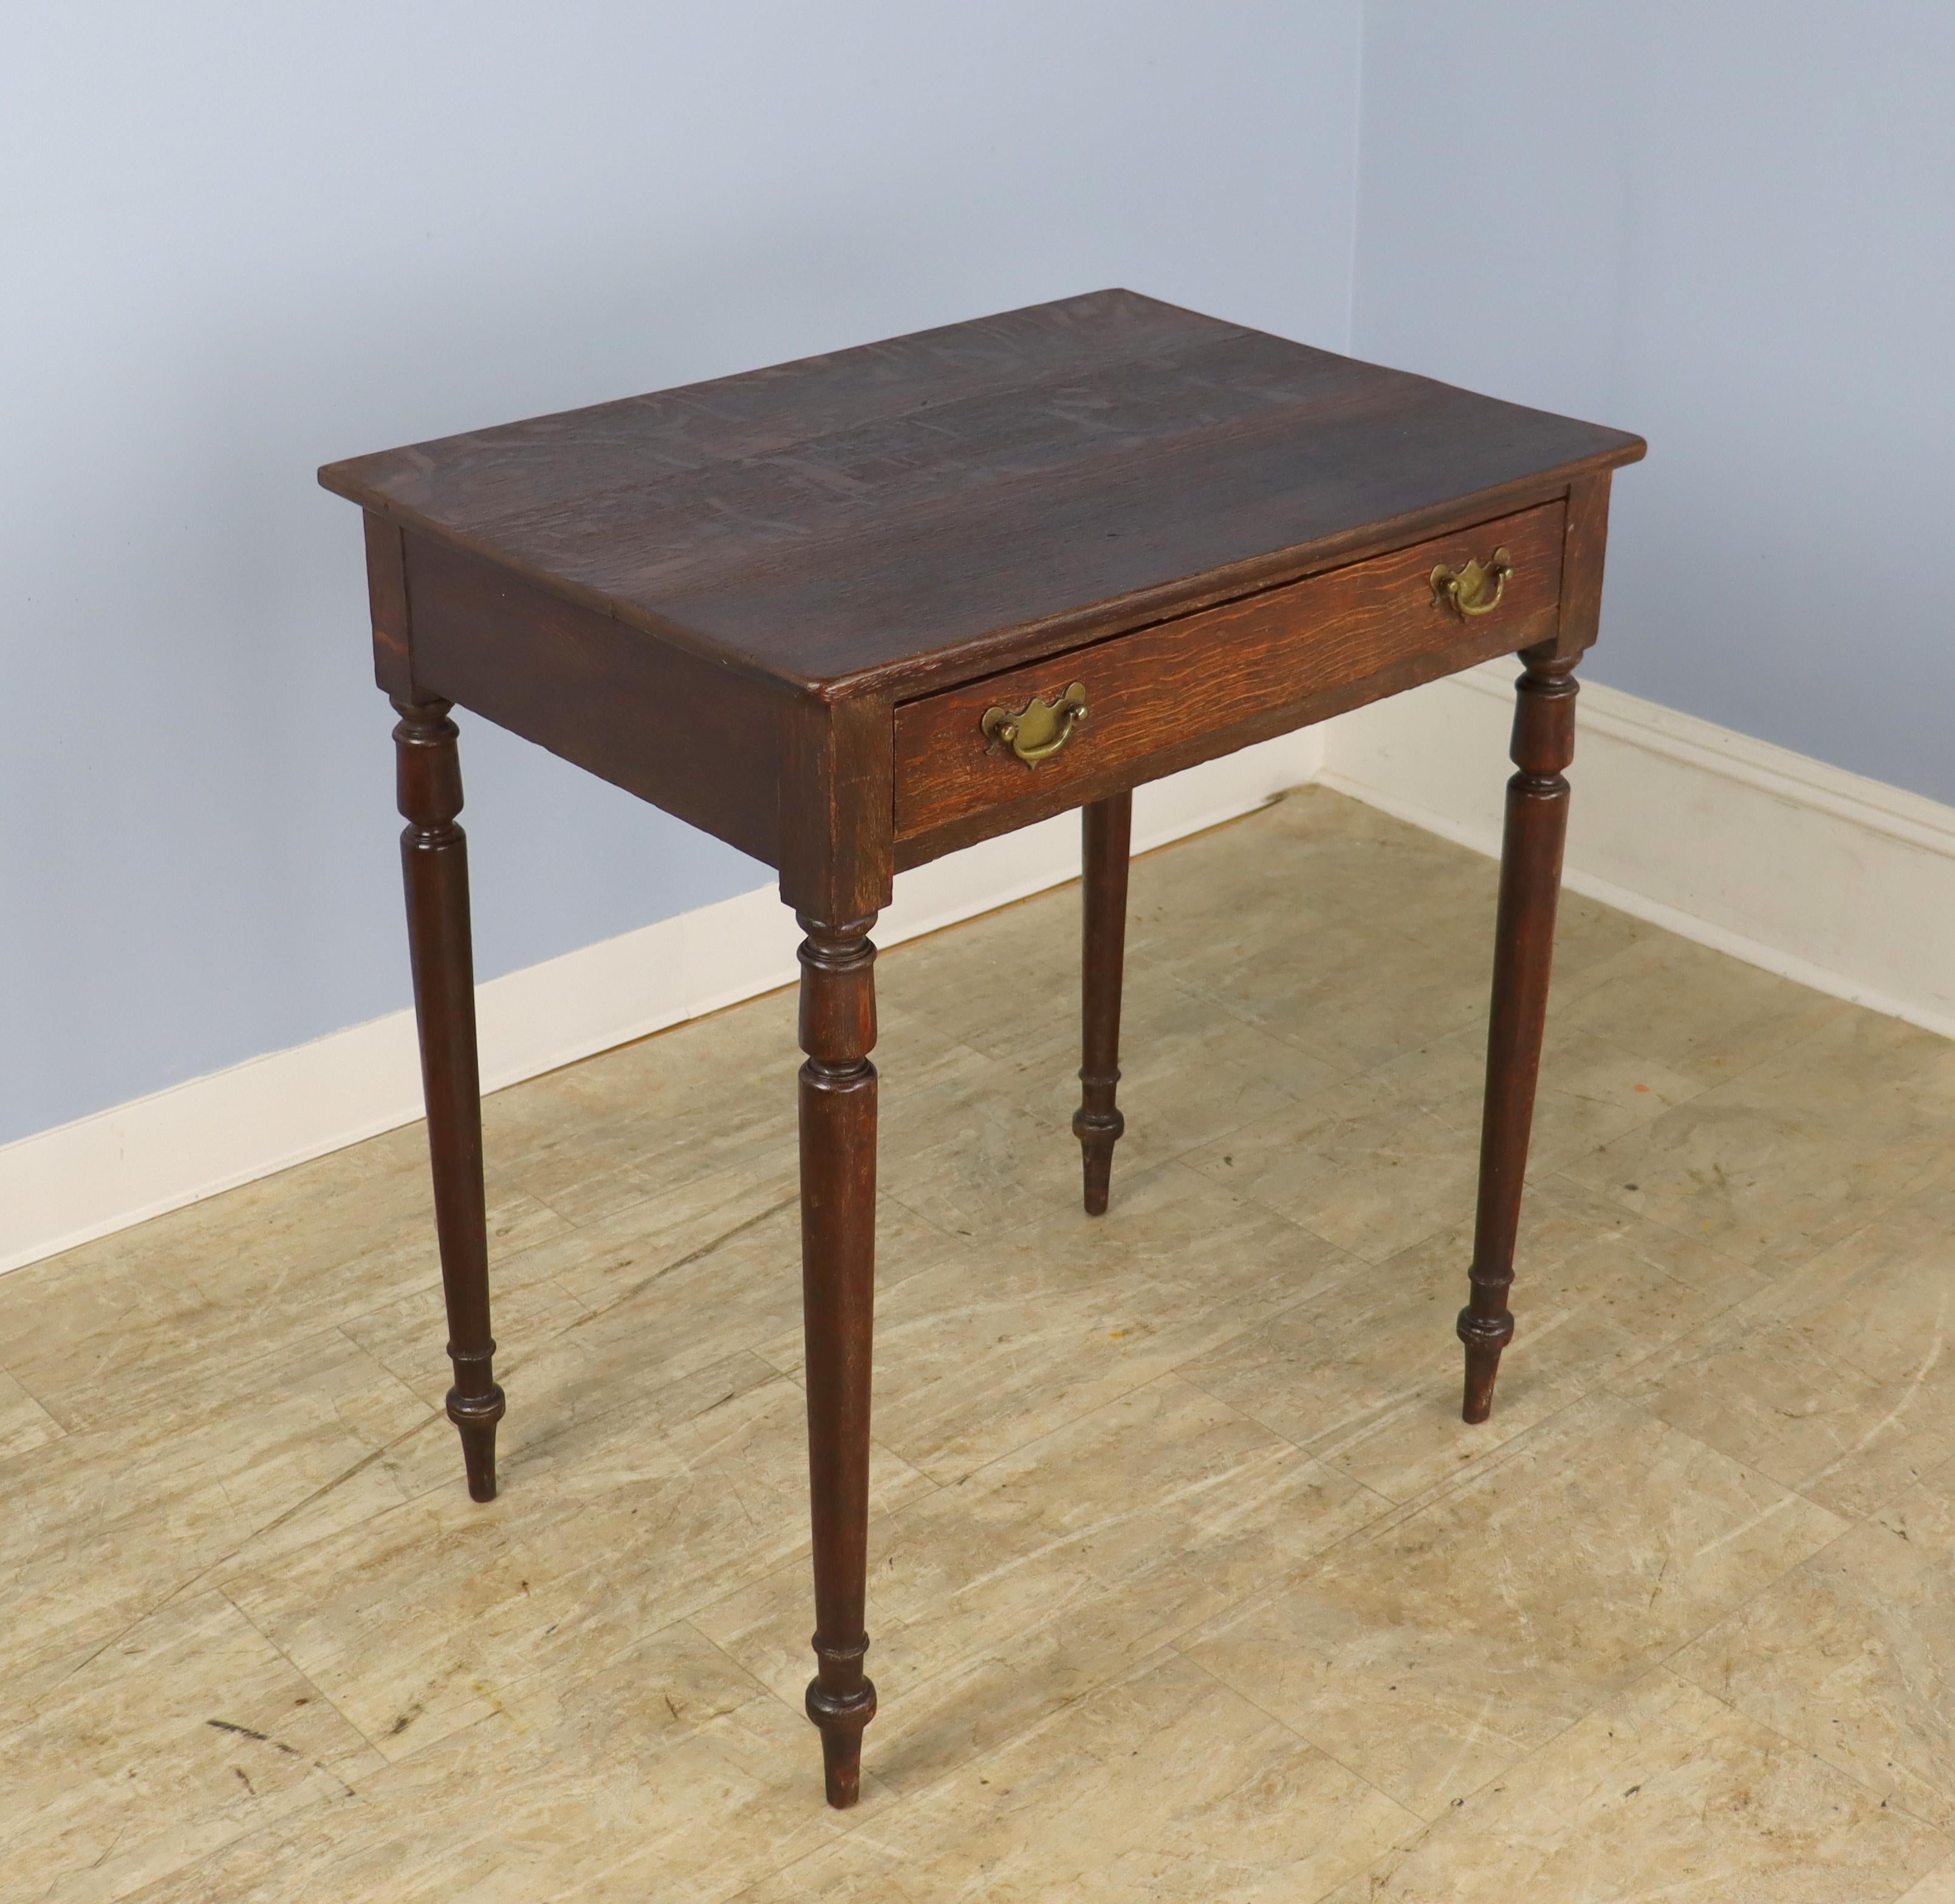 An elegant dark oak side table with slim turned legs and a single roomy drawer. Brasses are original.